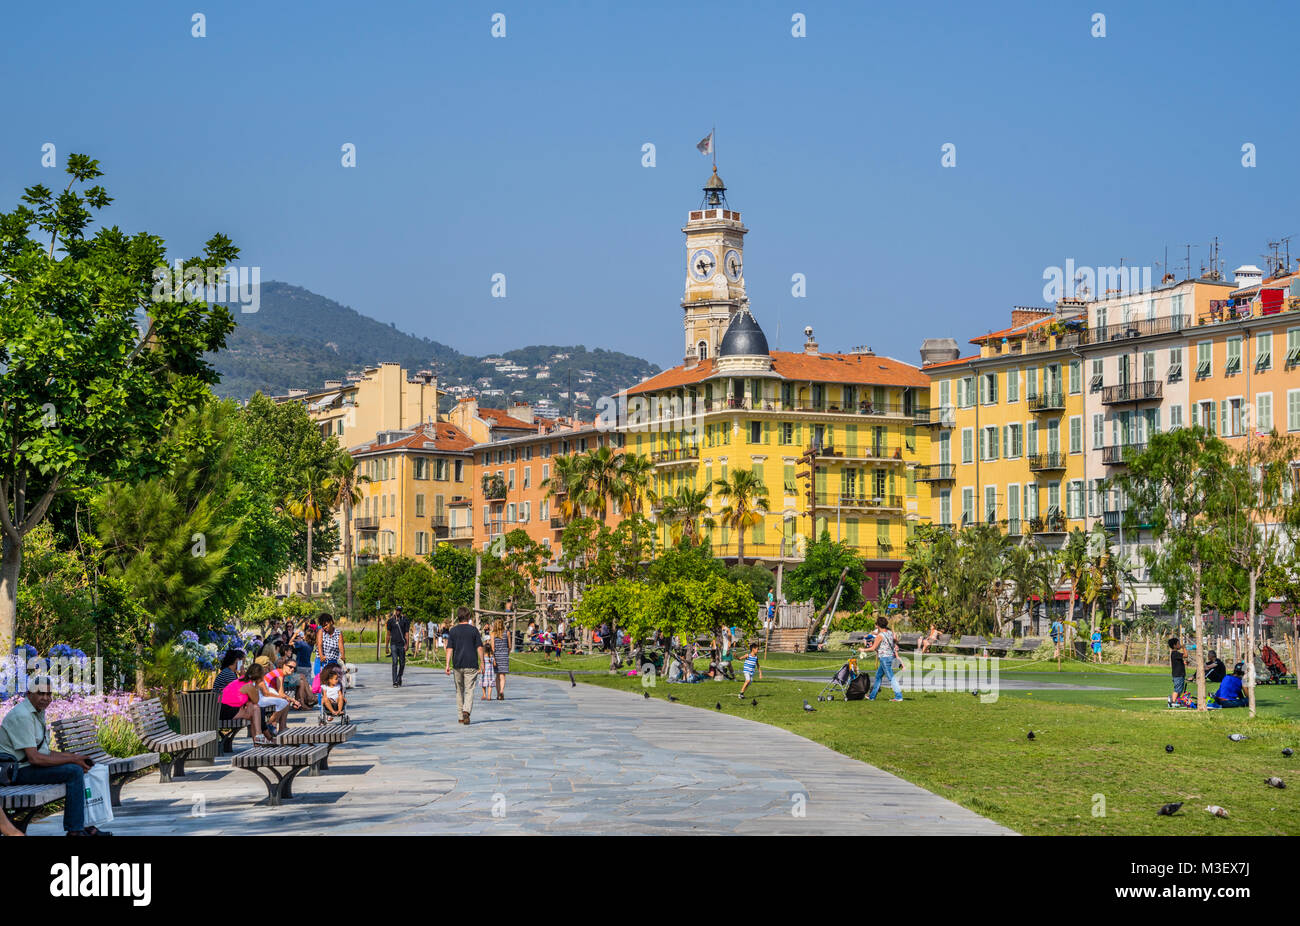 France, Alpes-Maritime department, Côte d'Azur, Nice, the Promenade du Paillon is a popular green space in Nice Stock Photo